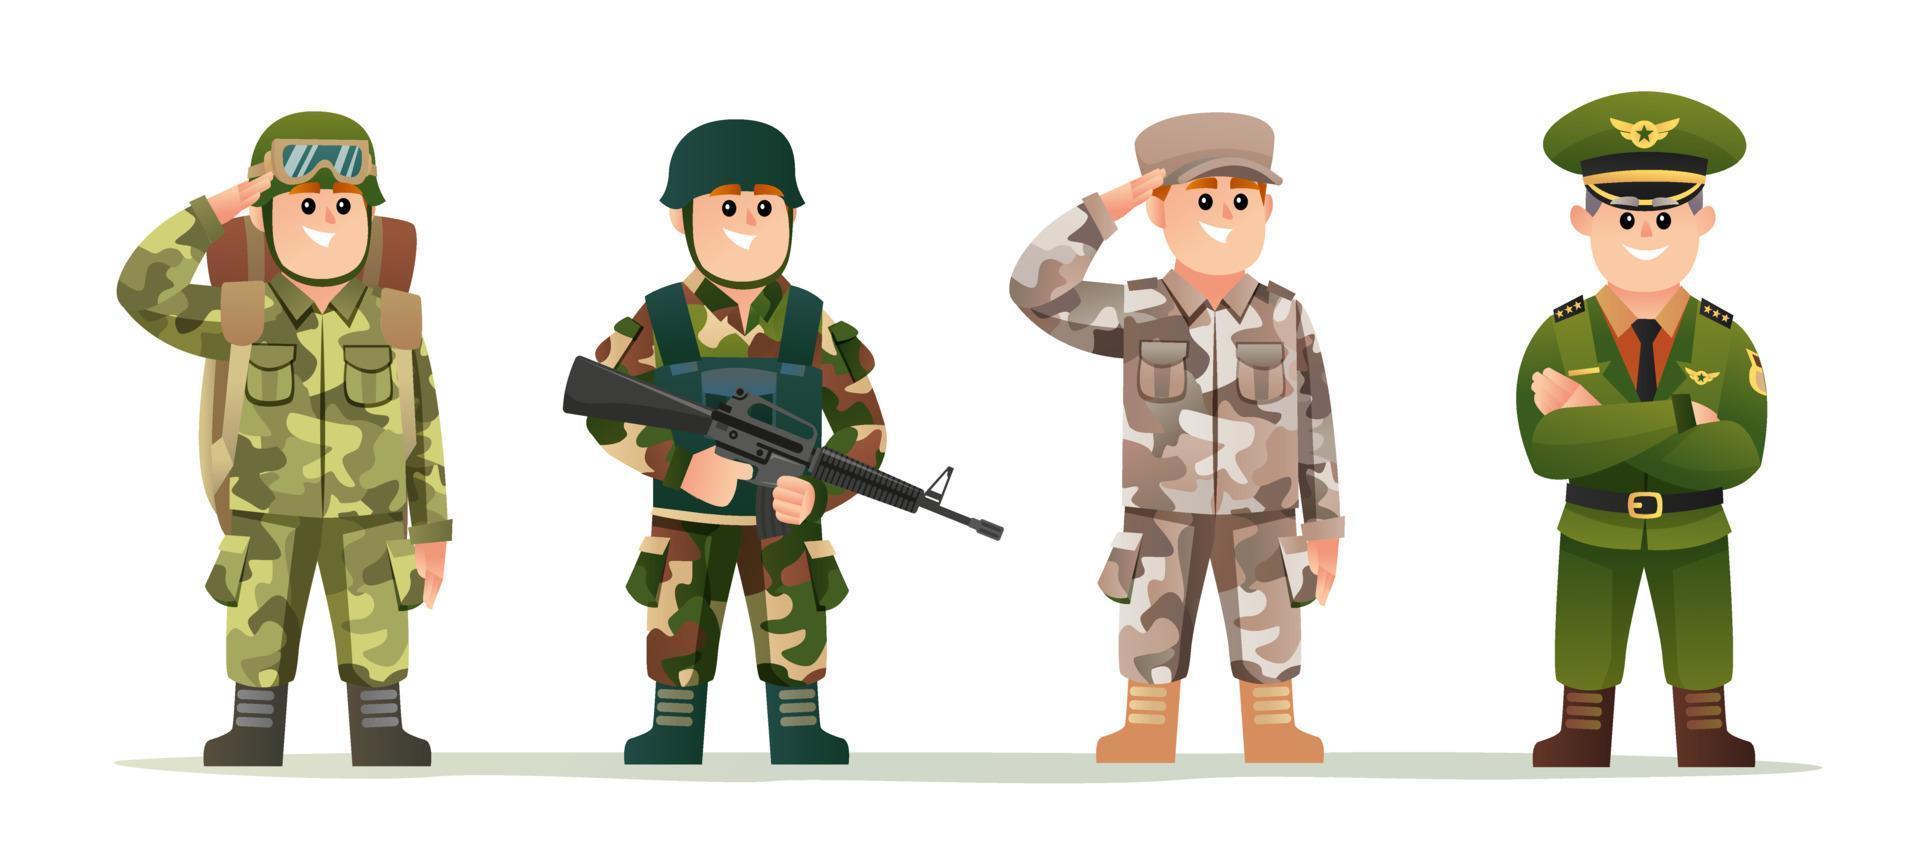 Cute little army captain with soldiers in various camouflage costumes character set vector